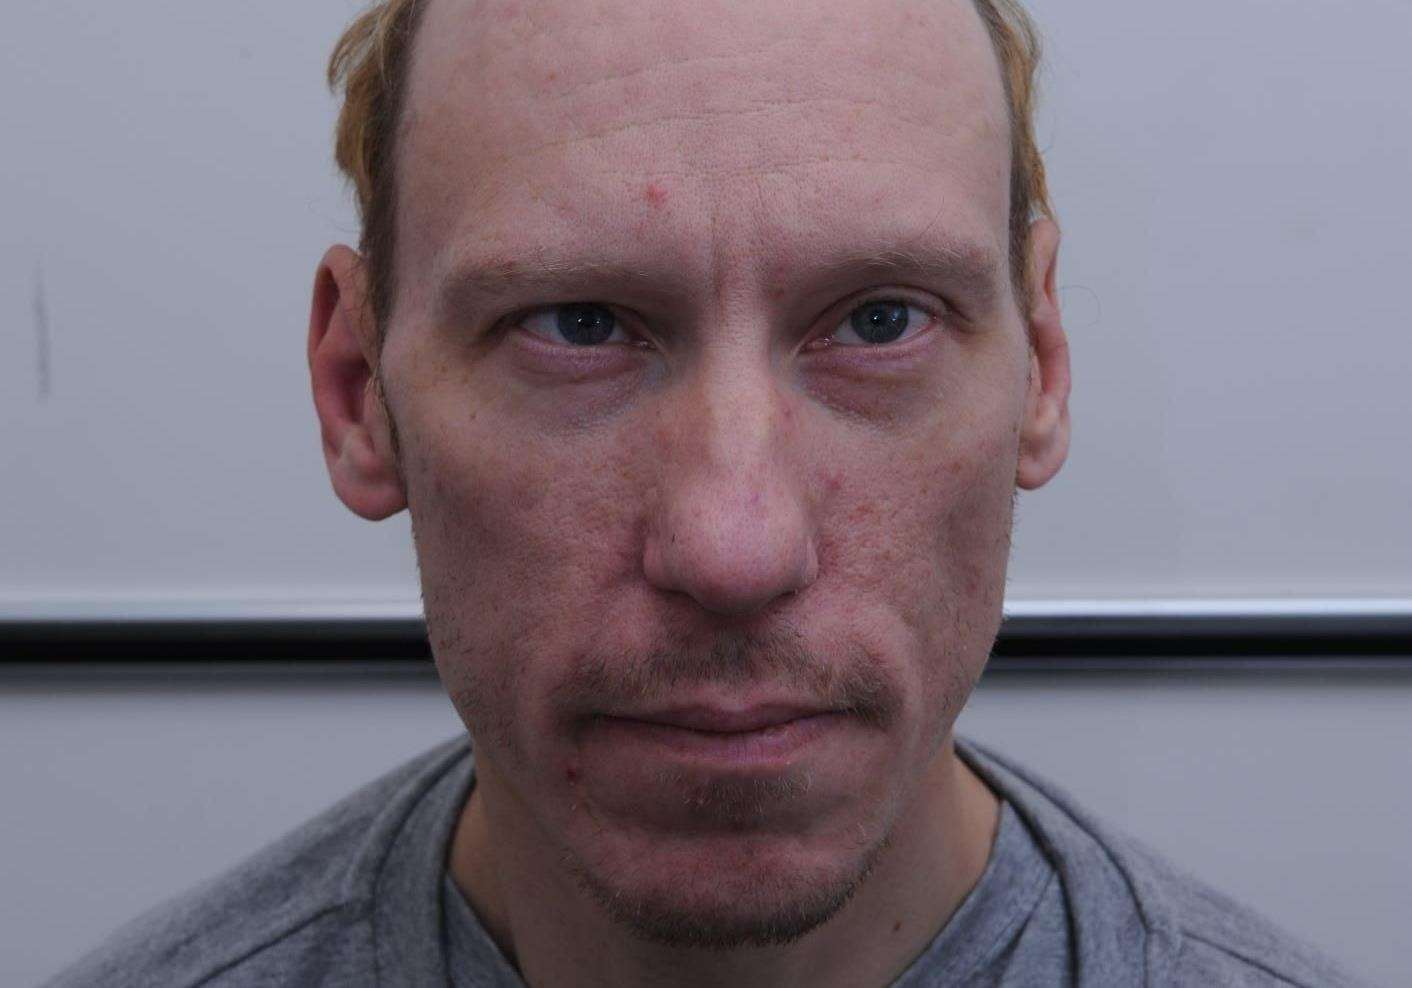 Stephen Port murdered four people